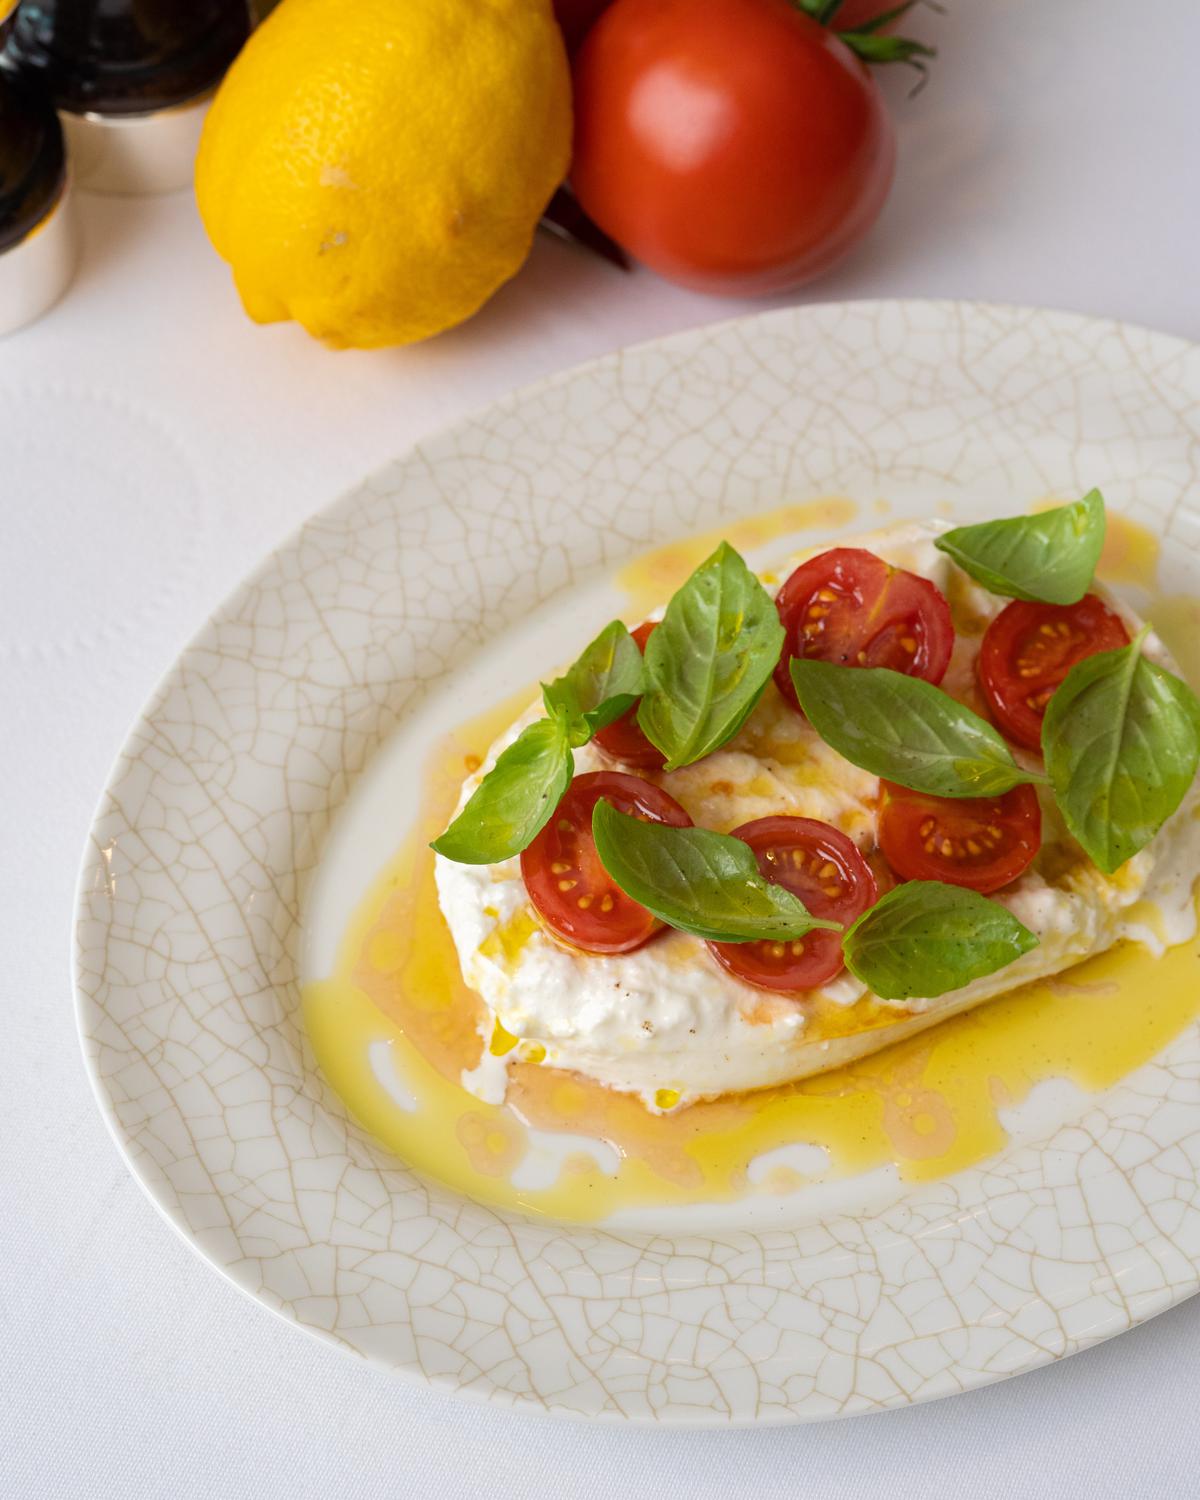 Burrata with cherry tomatoes and basil at LPM